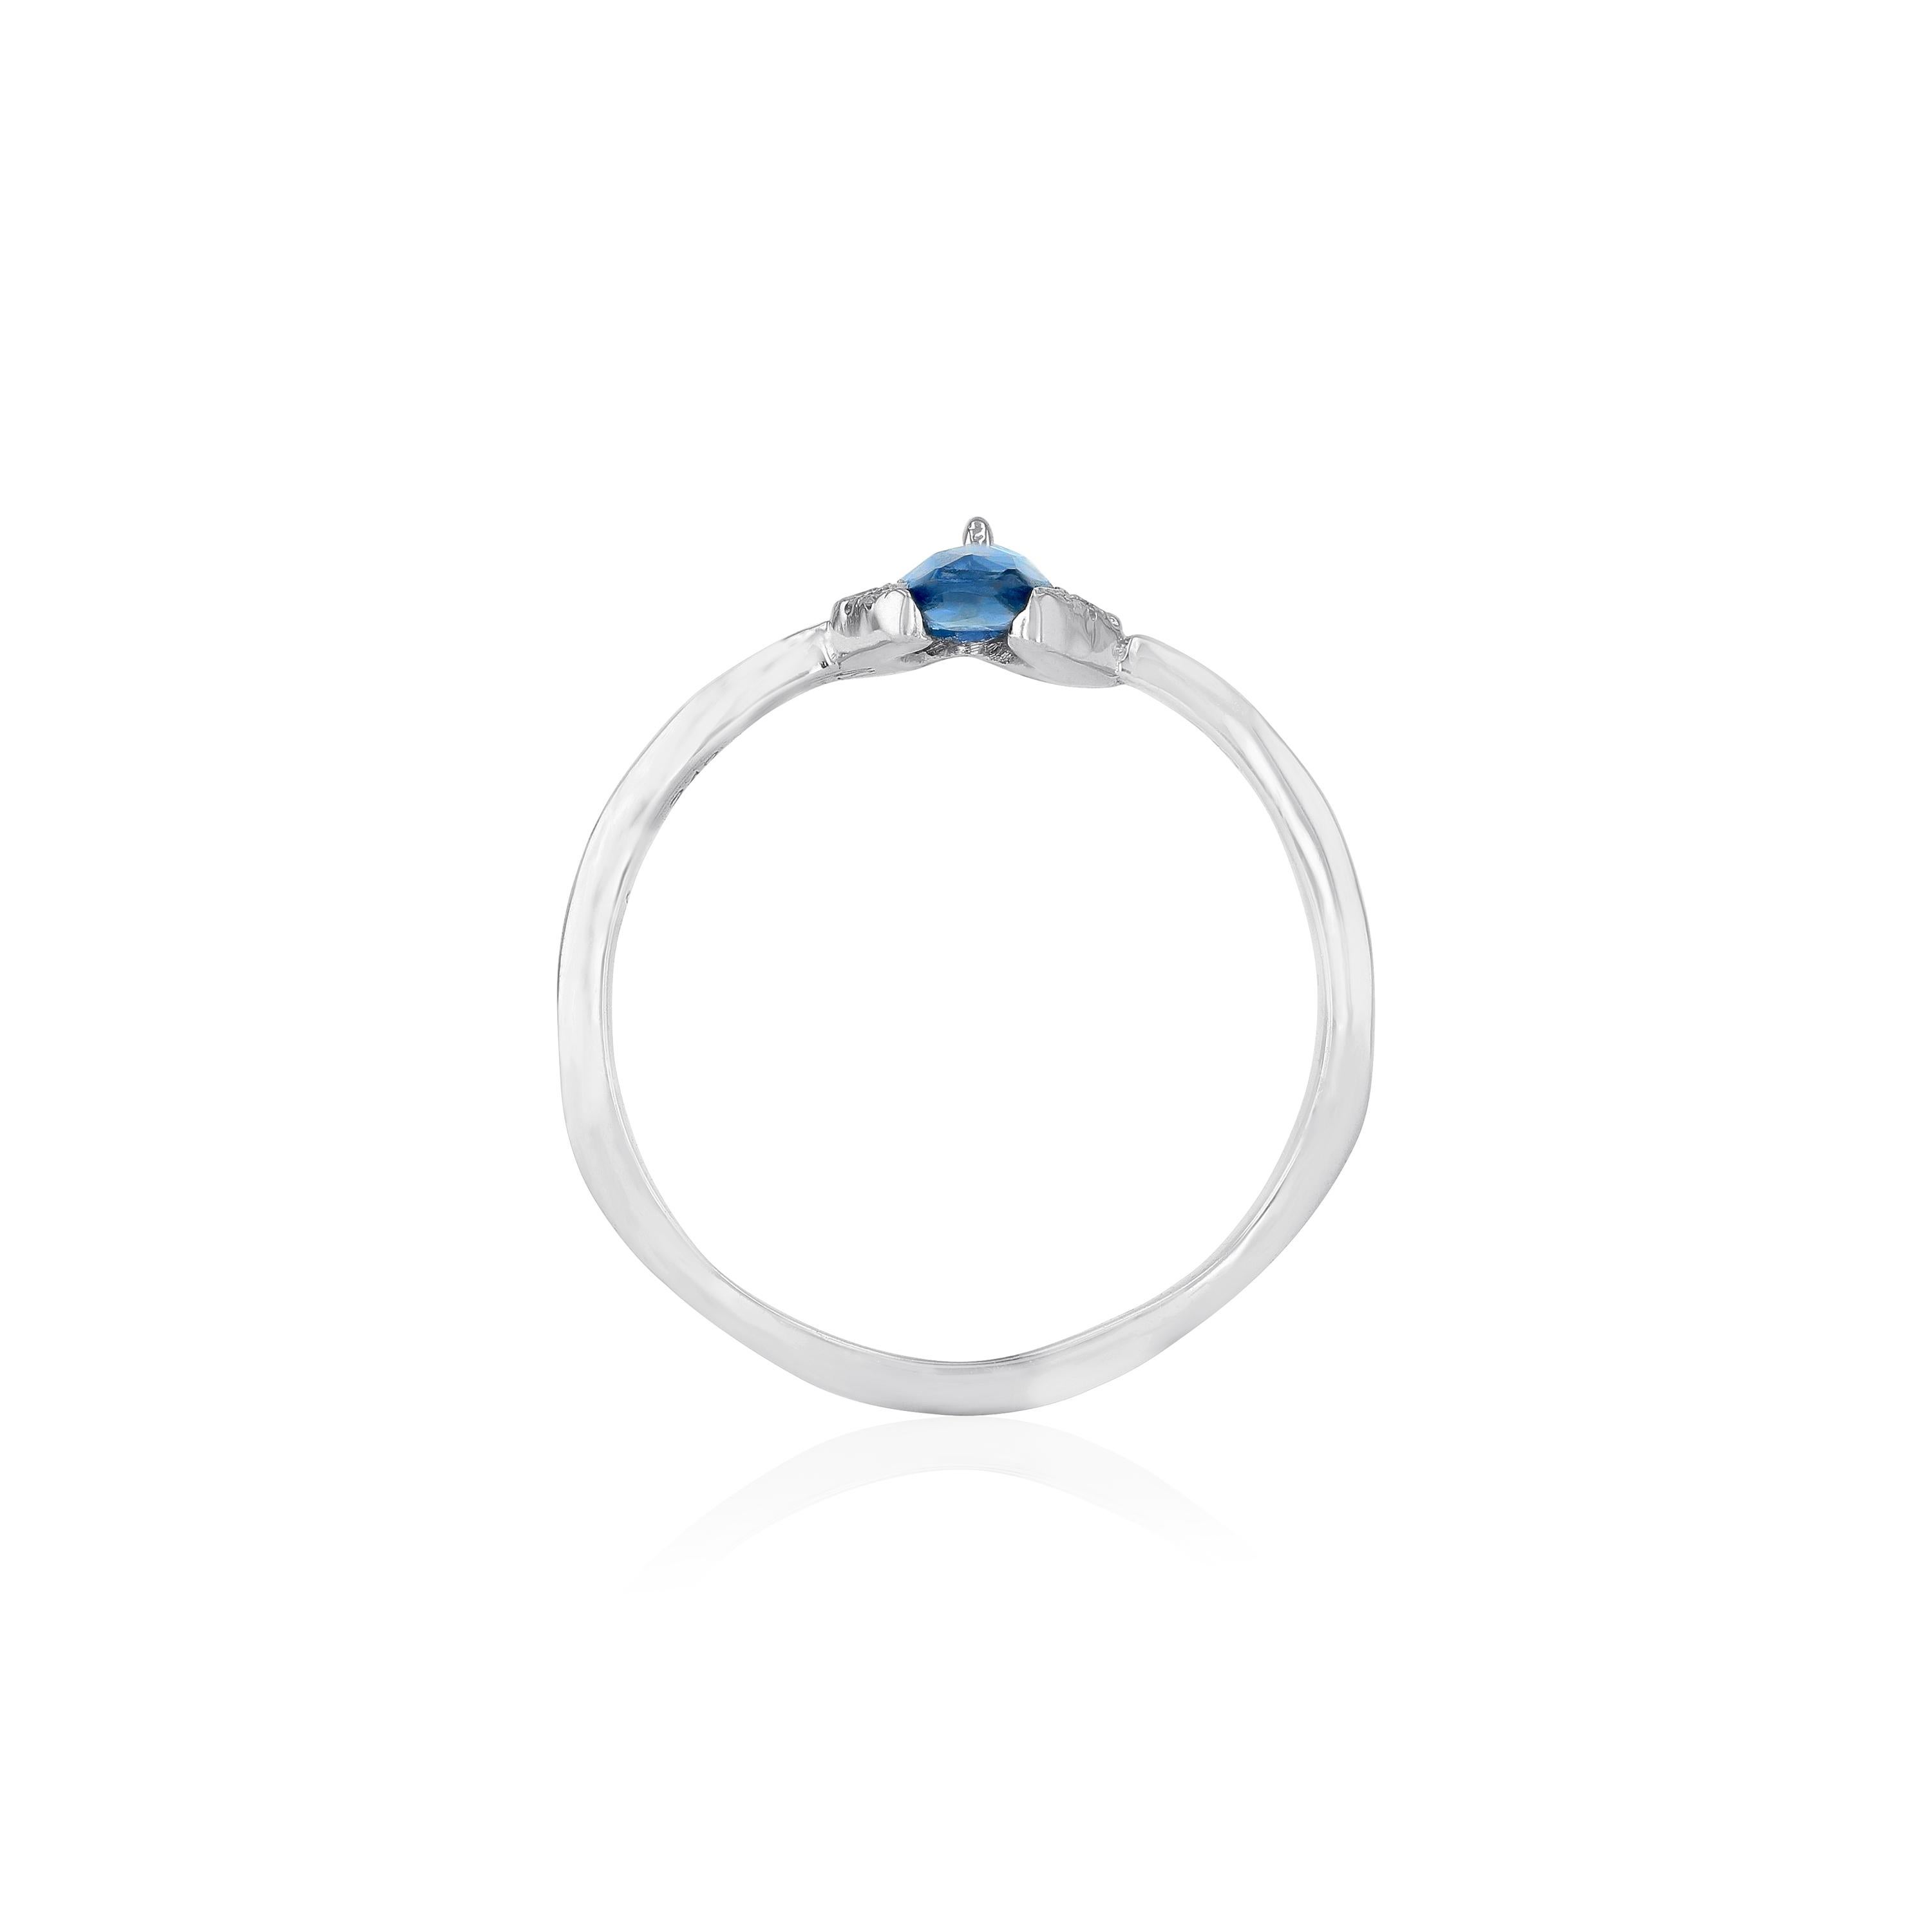 Inspired from the Arabesque designs and Islamic architecture, this ring is crafted from 18k white gold with blue sapphire and a marquise diamond on top. Slip it on with similar styles for stacked look.
 -Diamonds (Total Carat Weight: 0.15ct) 
- Blue